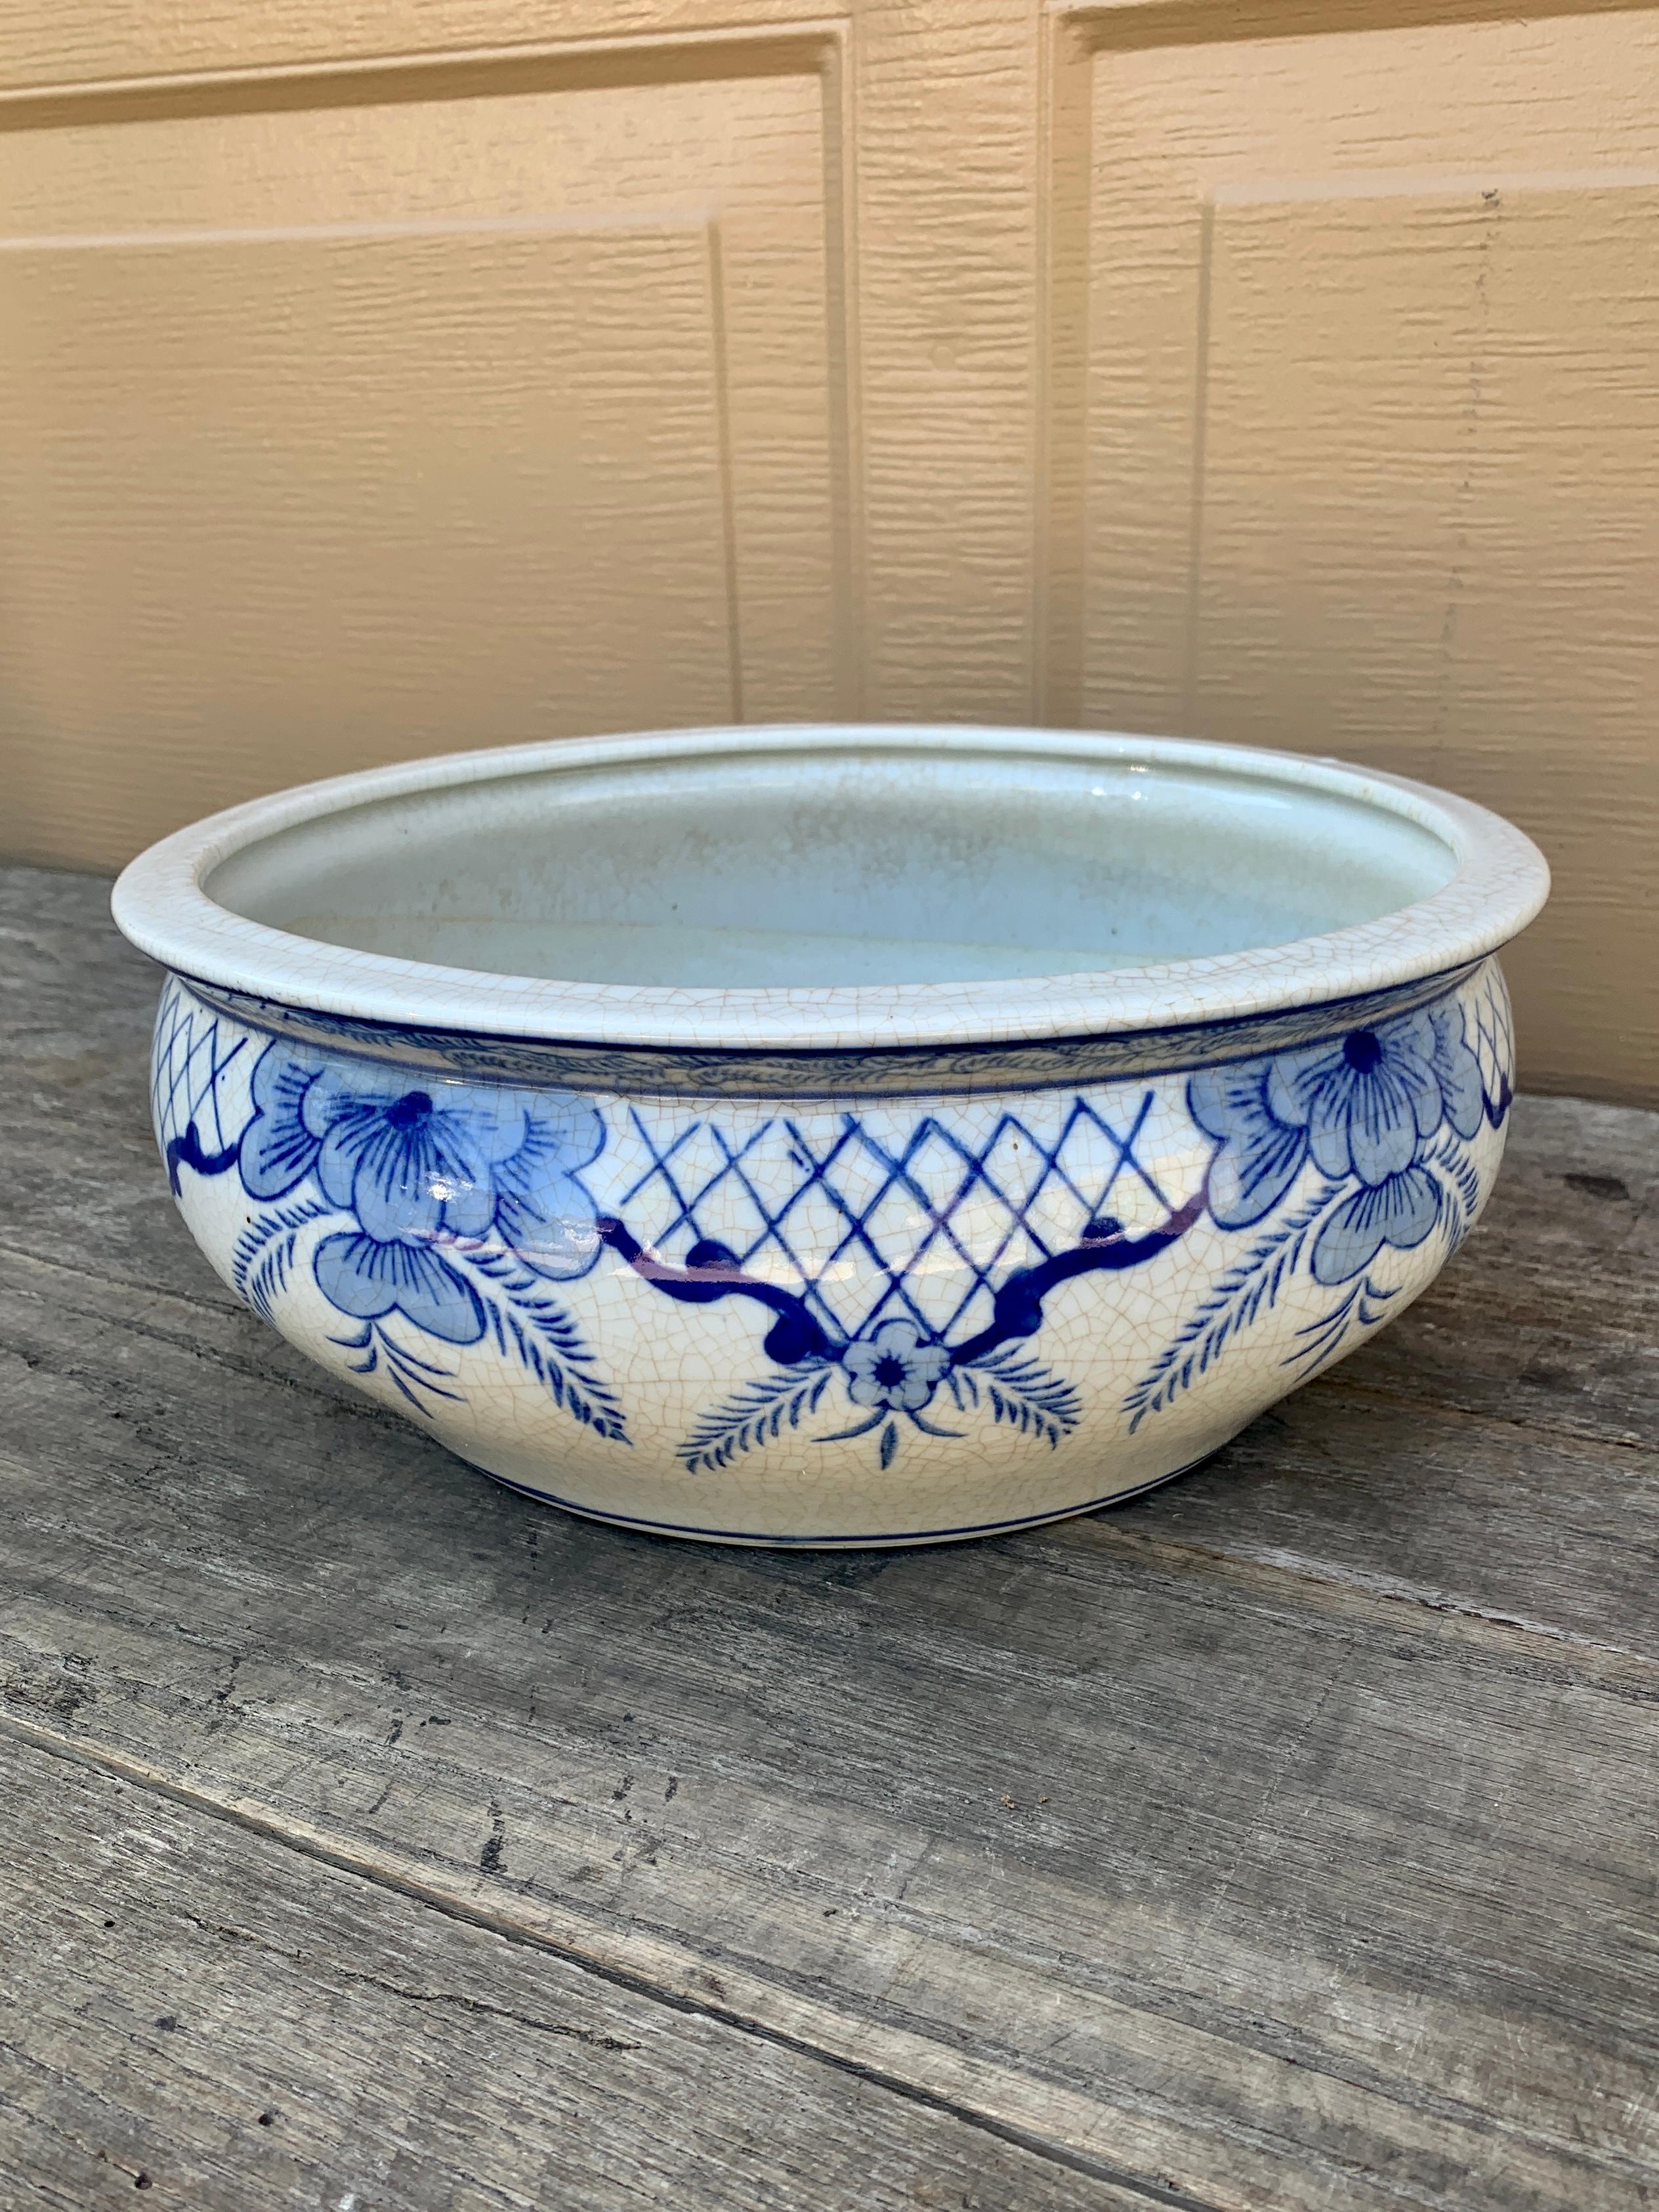 American Blue and White Porcelain Chinoiserie Planter